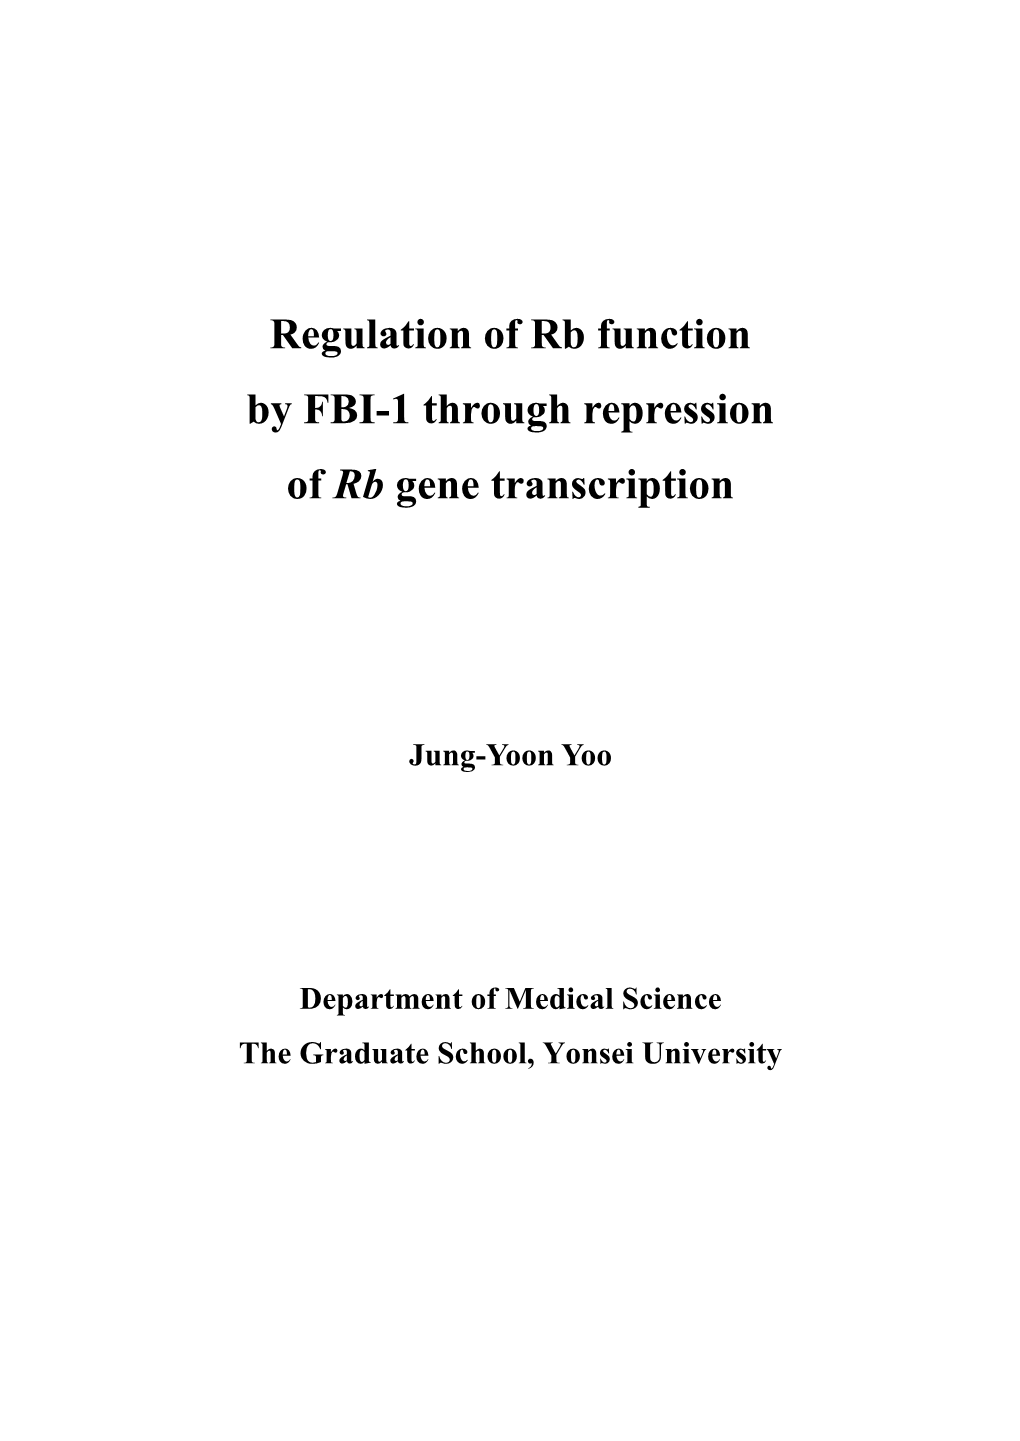 Regulation of Rb Function by FBI-1 Through Repression of Rb Gene Transcription